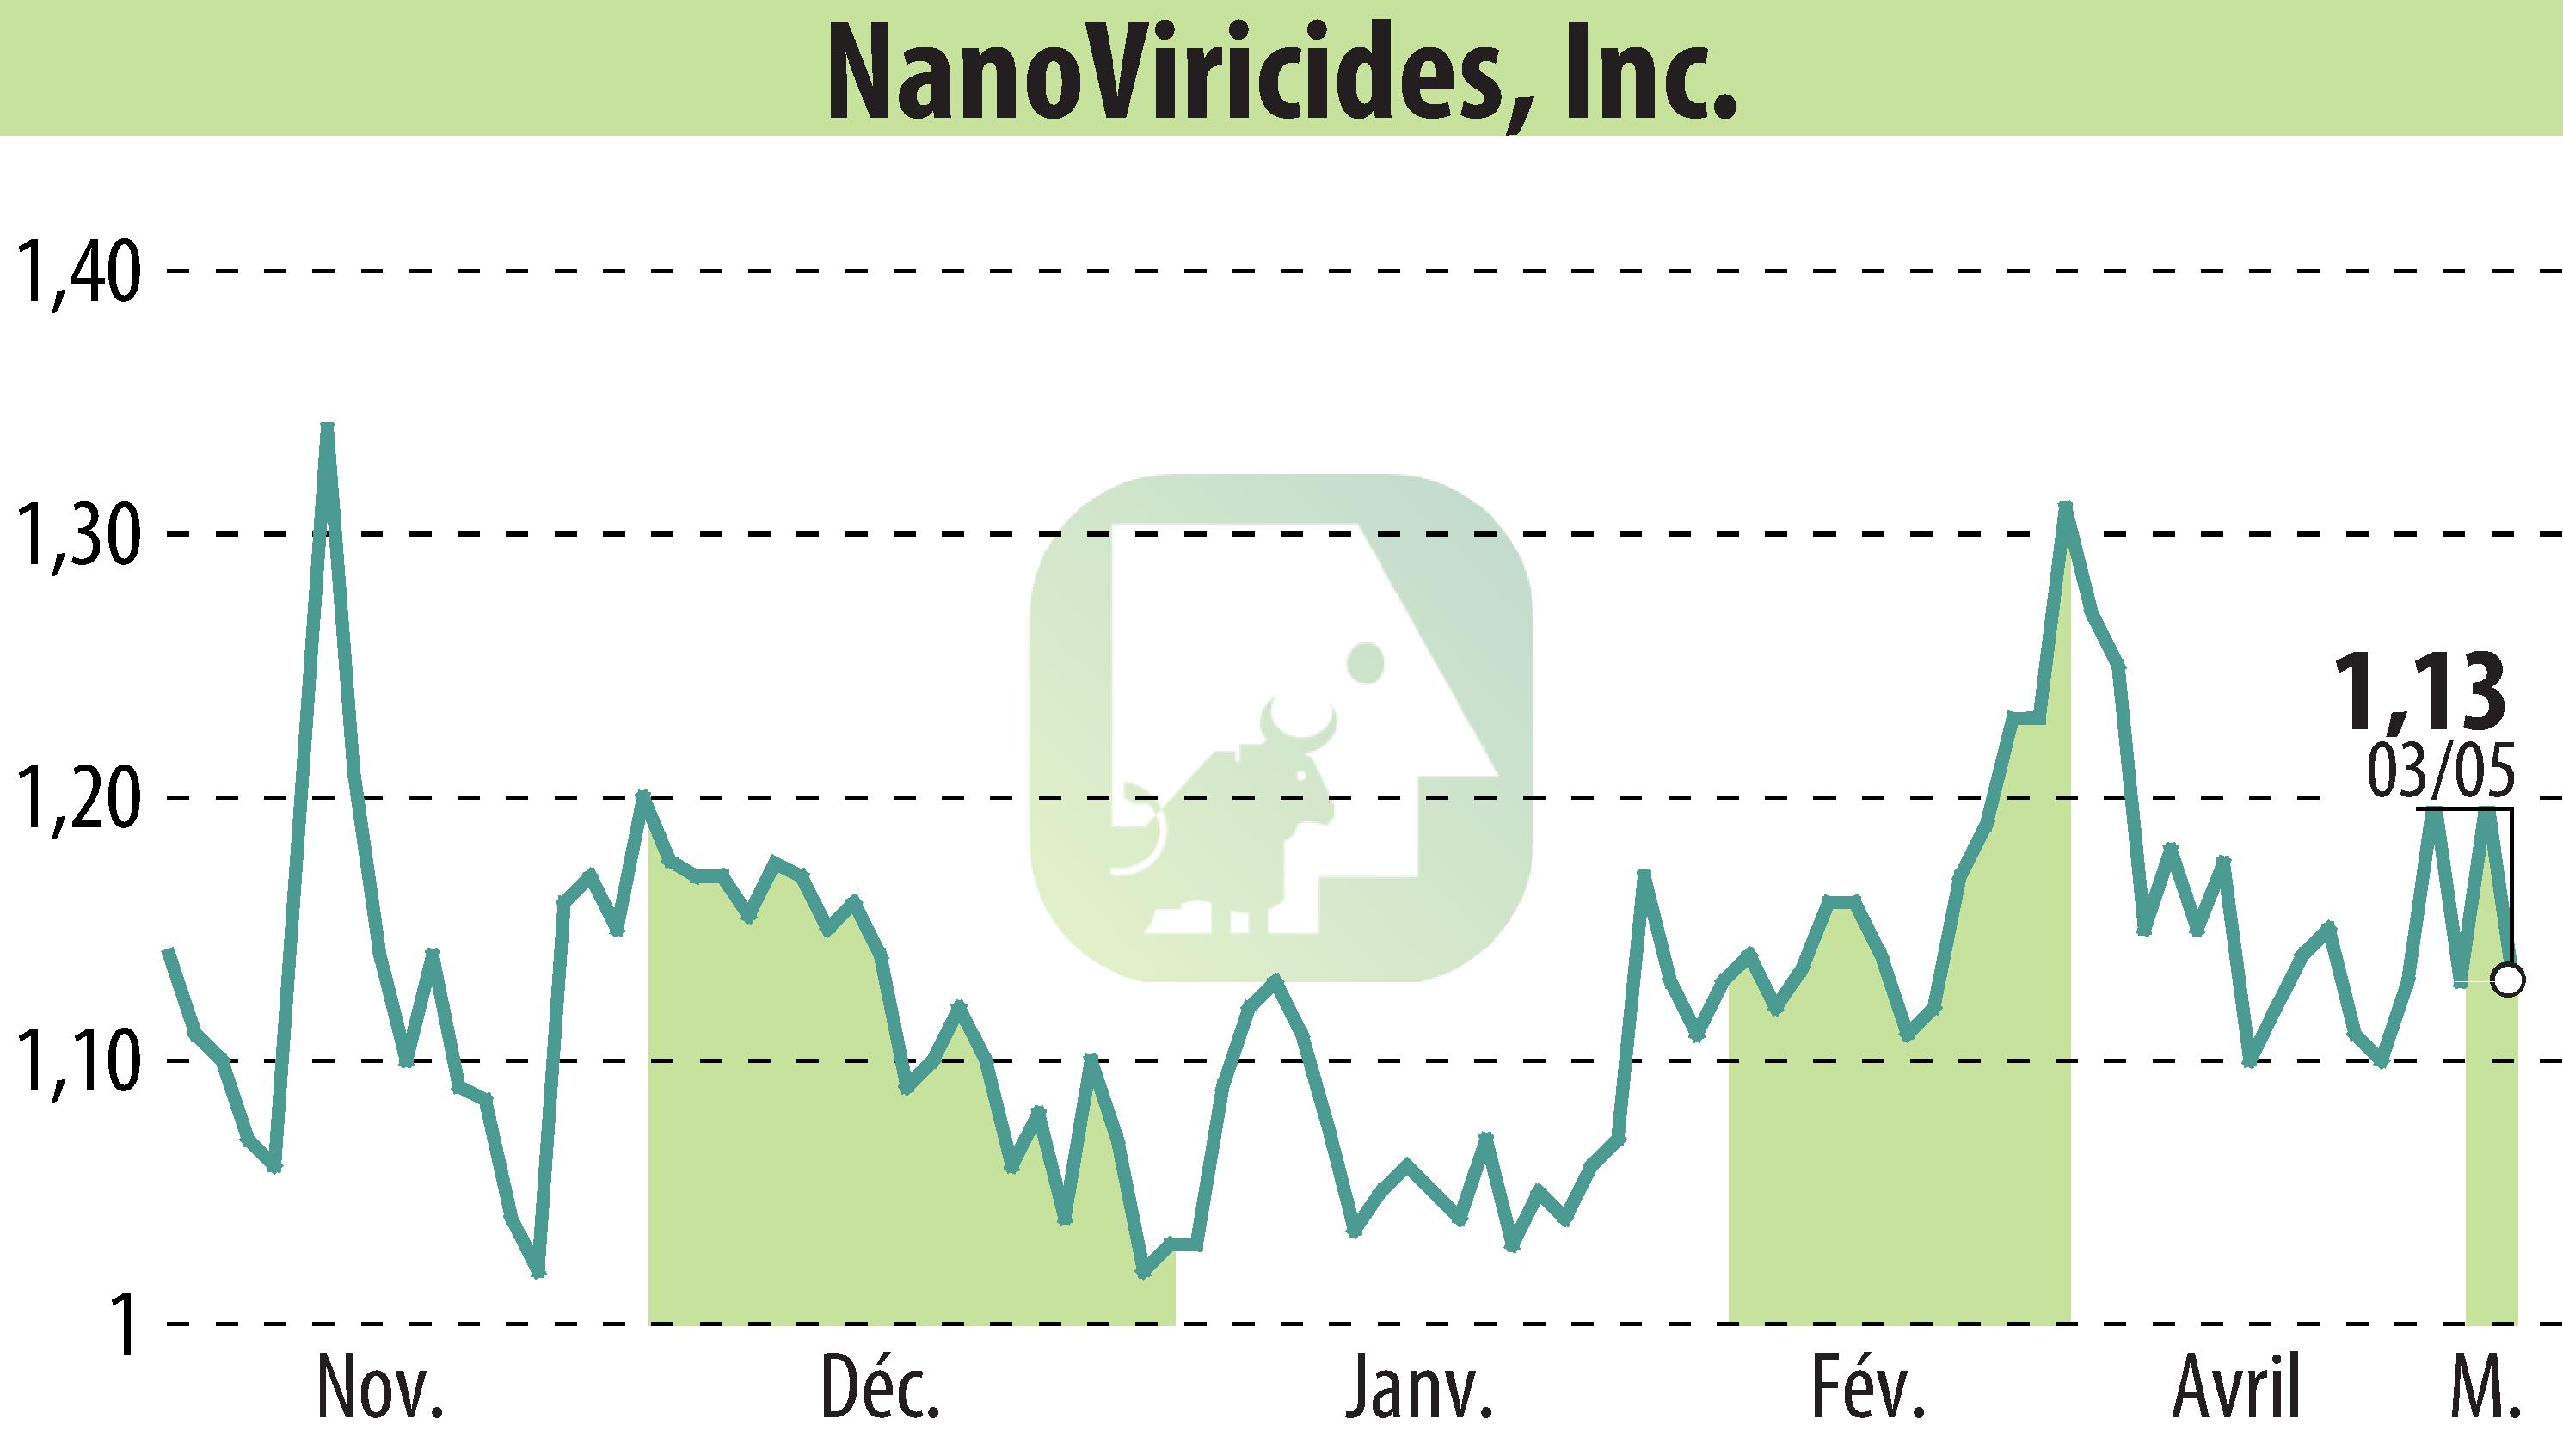 Stock price chart of NanoViricides, Inc. (EBR:NNVC) showing fluctuations.